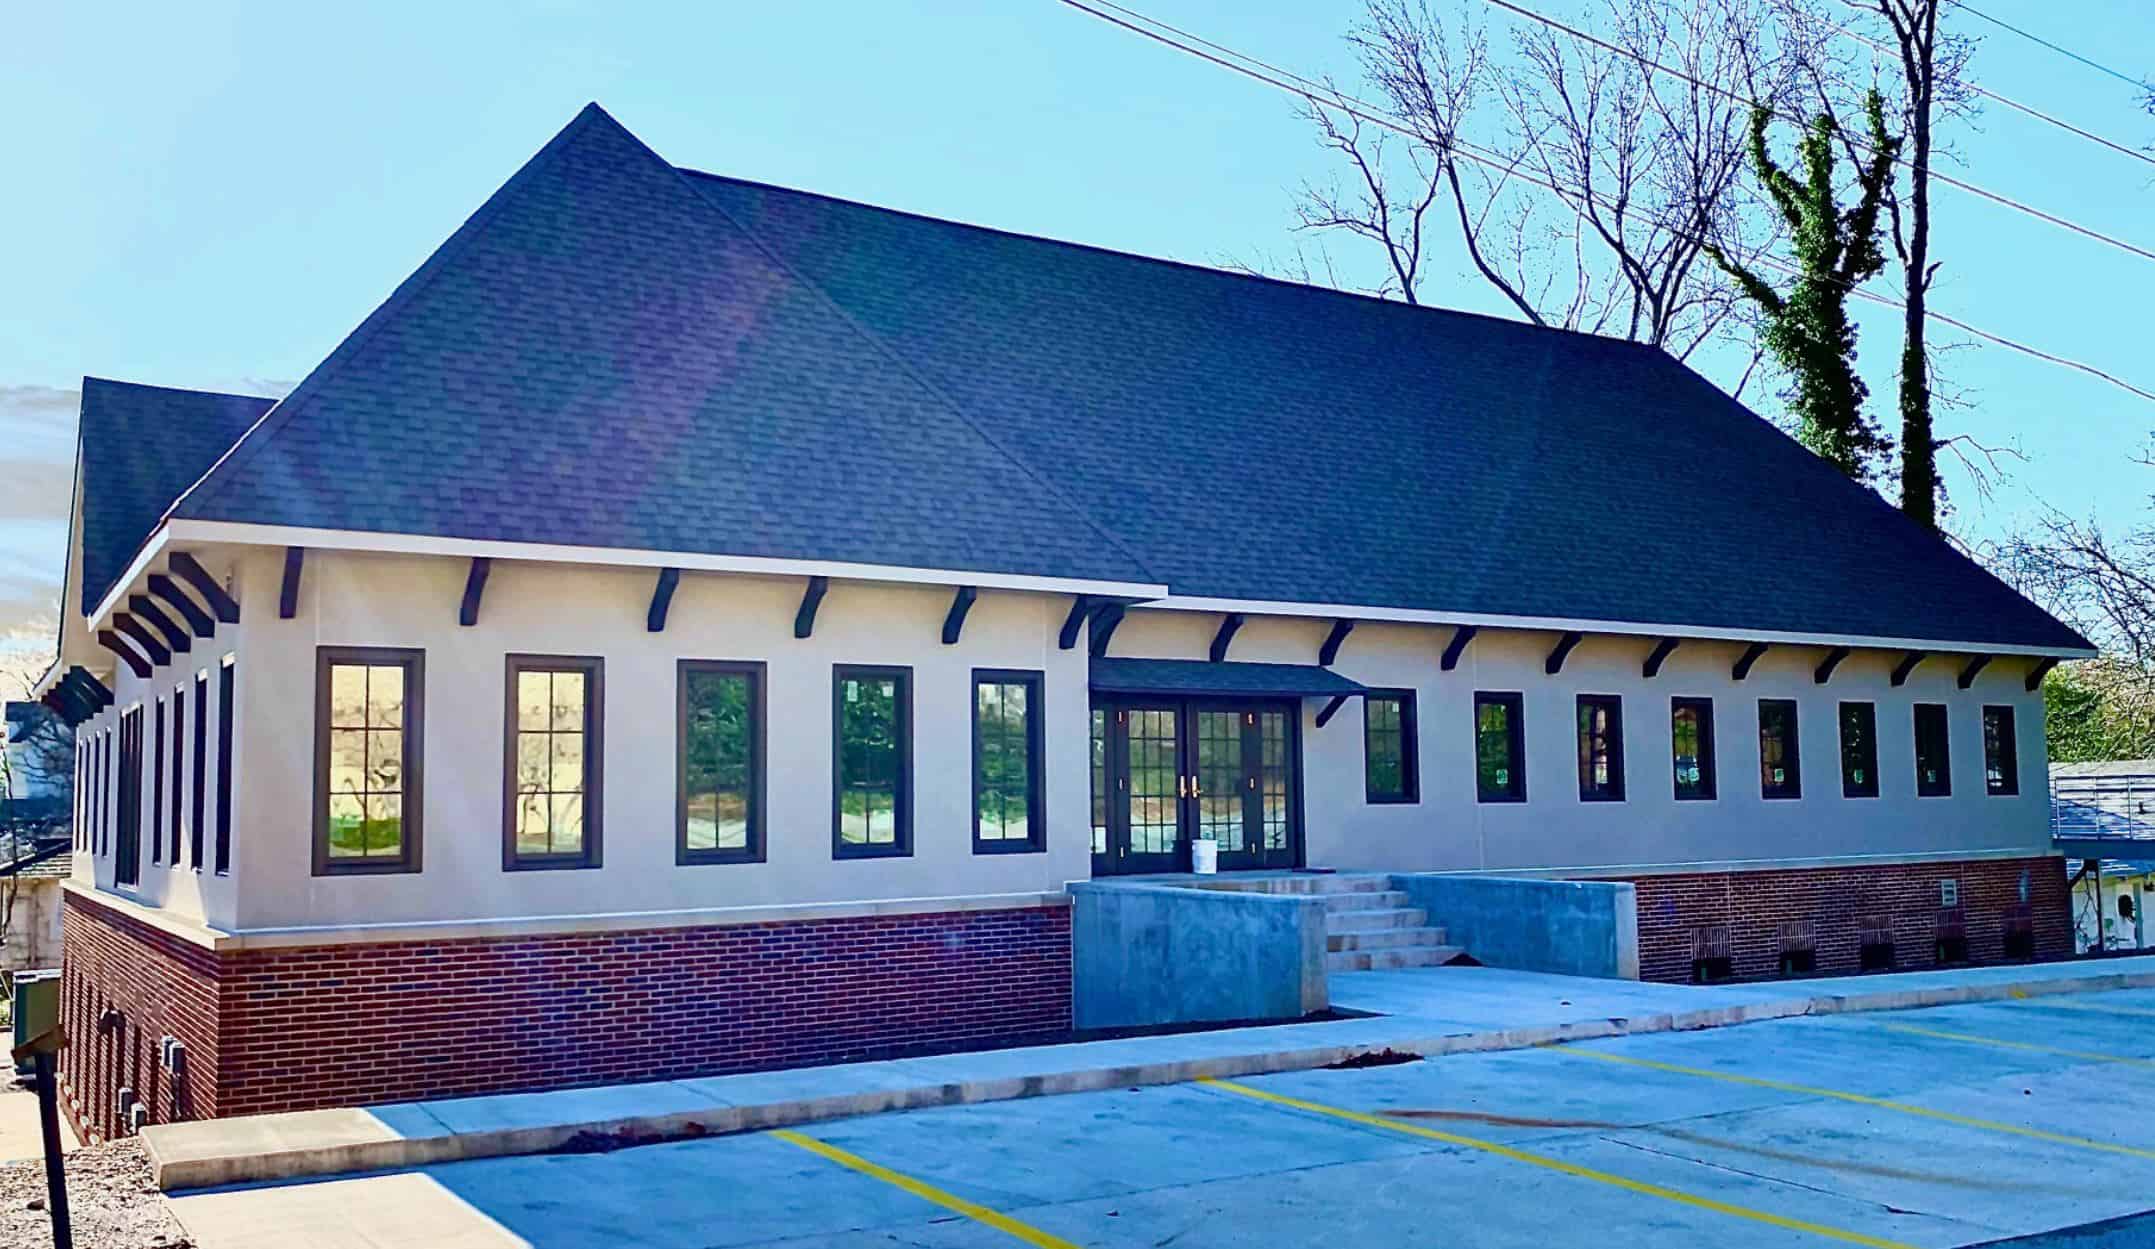 New office property near English Village sells for $3M